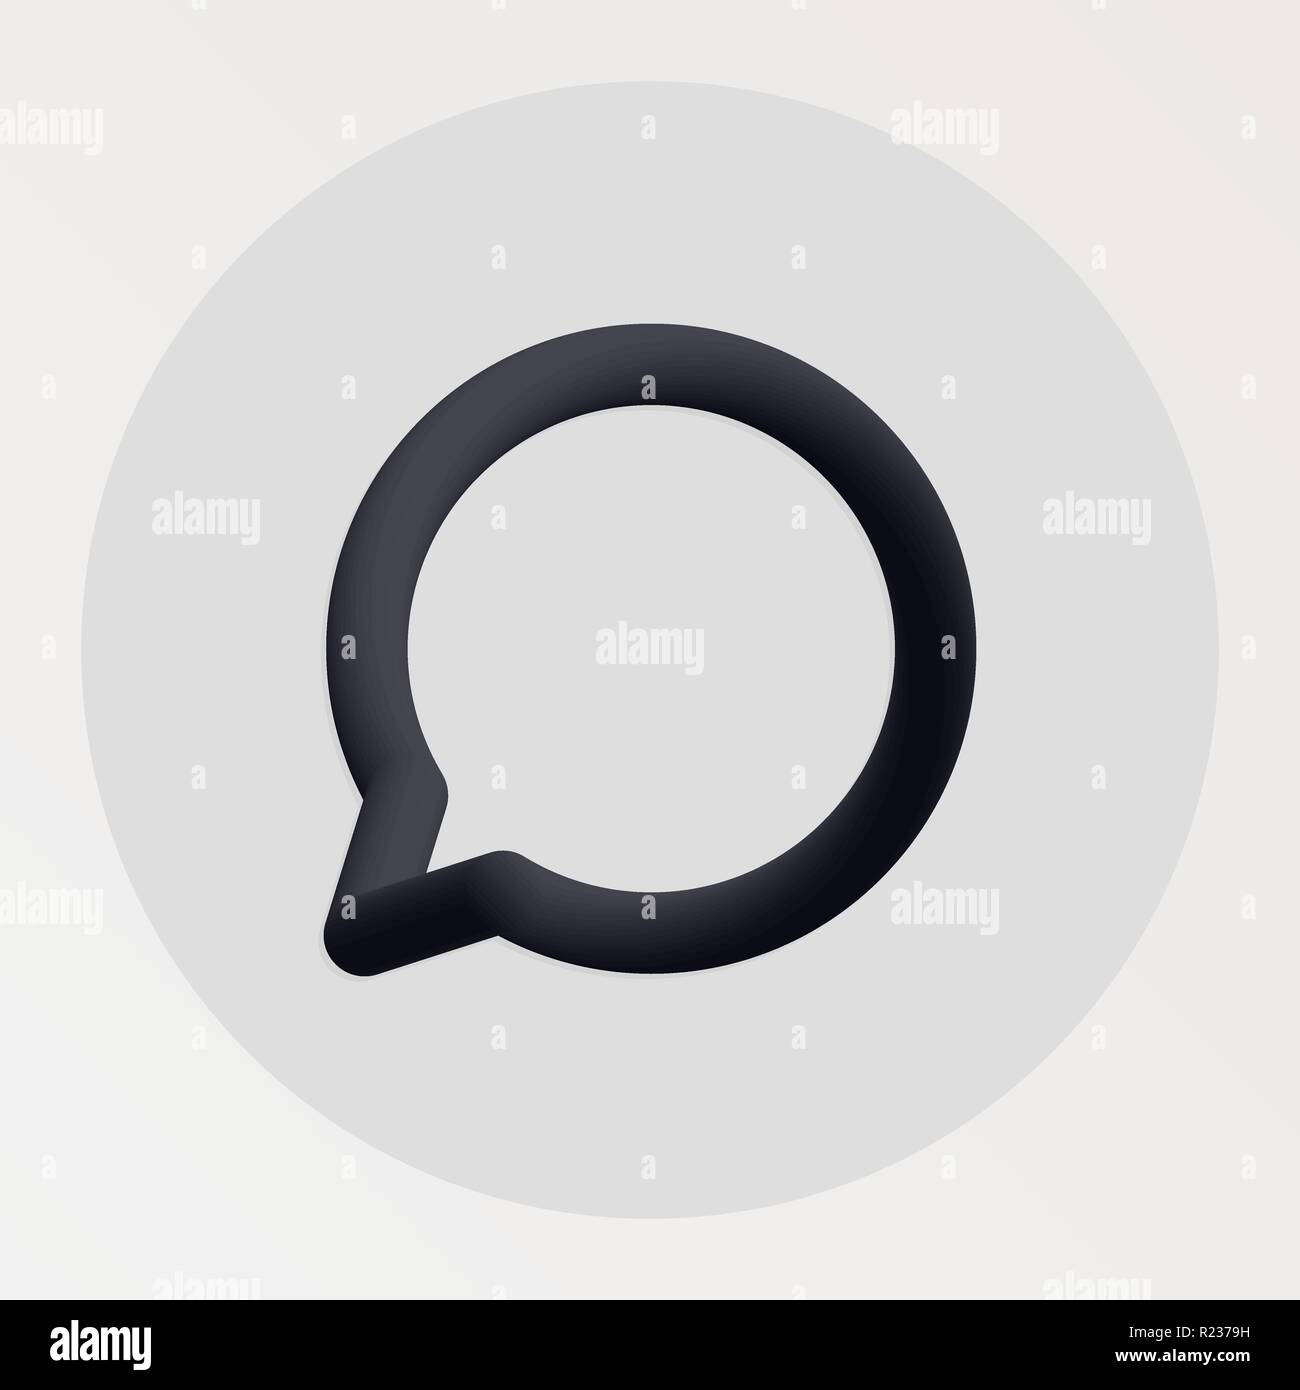 Comment blended bold black line icon. Vector illustration of speech bubble shape fluid pictogram in a circle over white background for your design Stock Vector